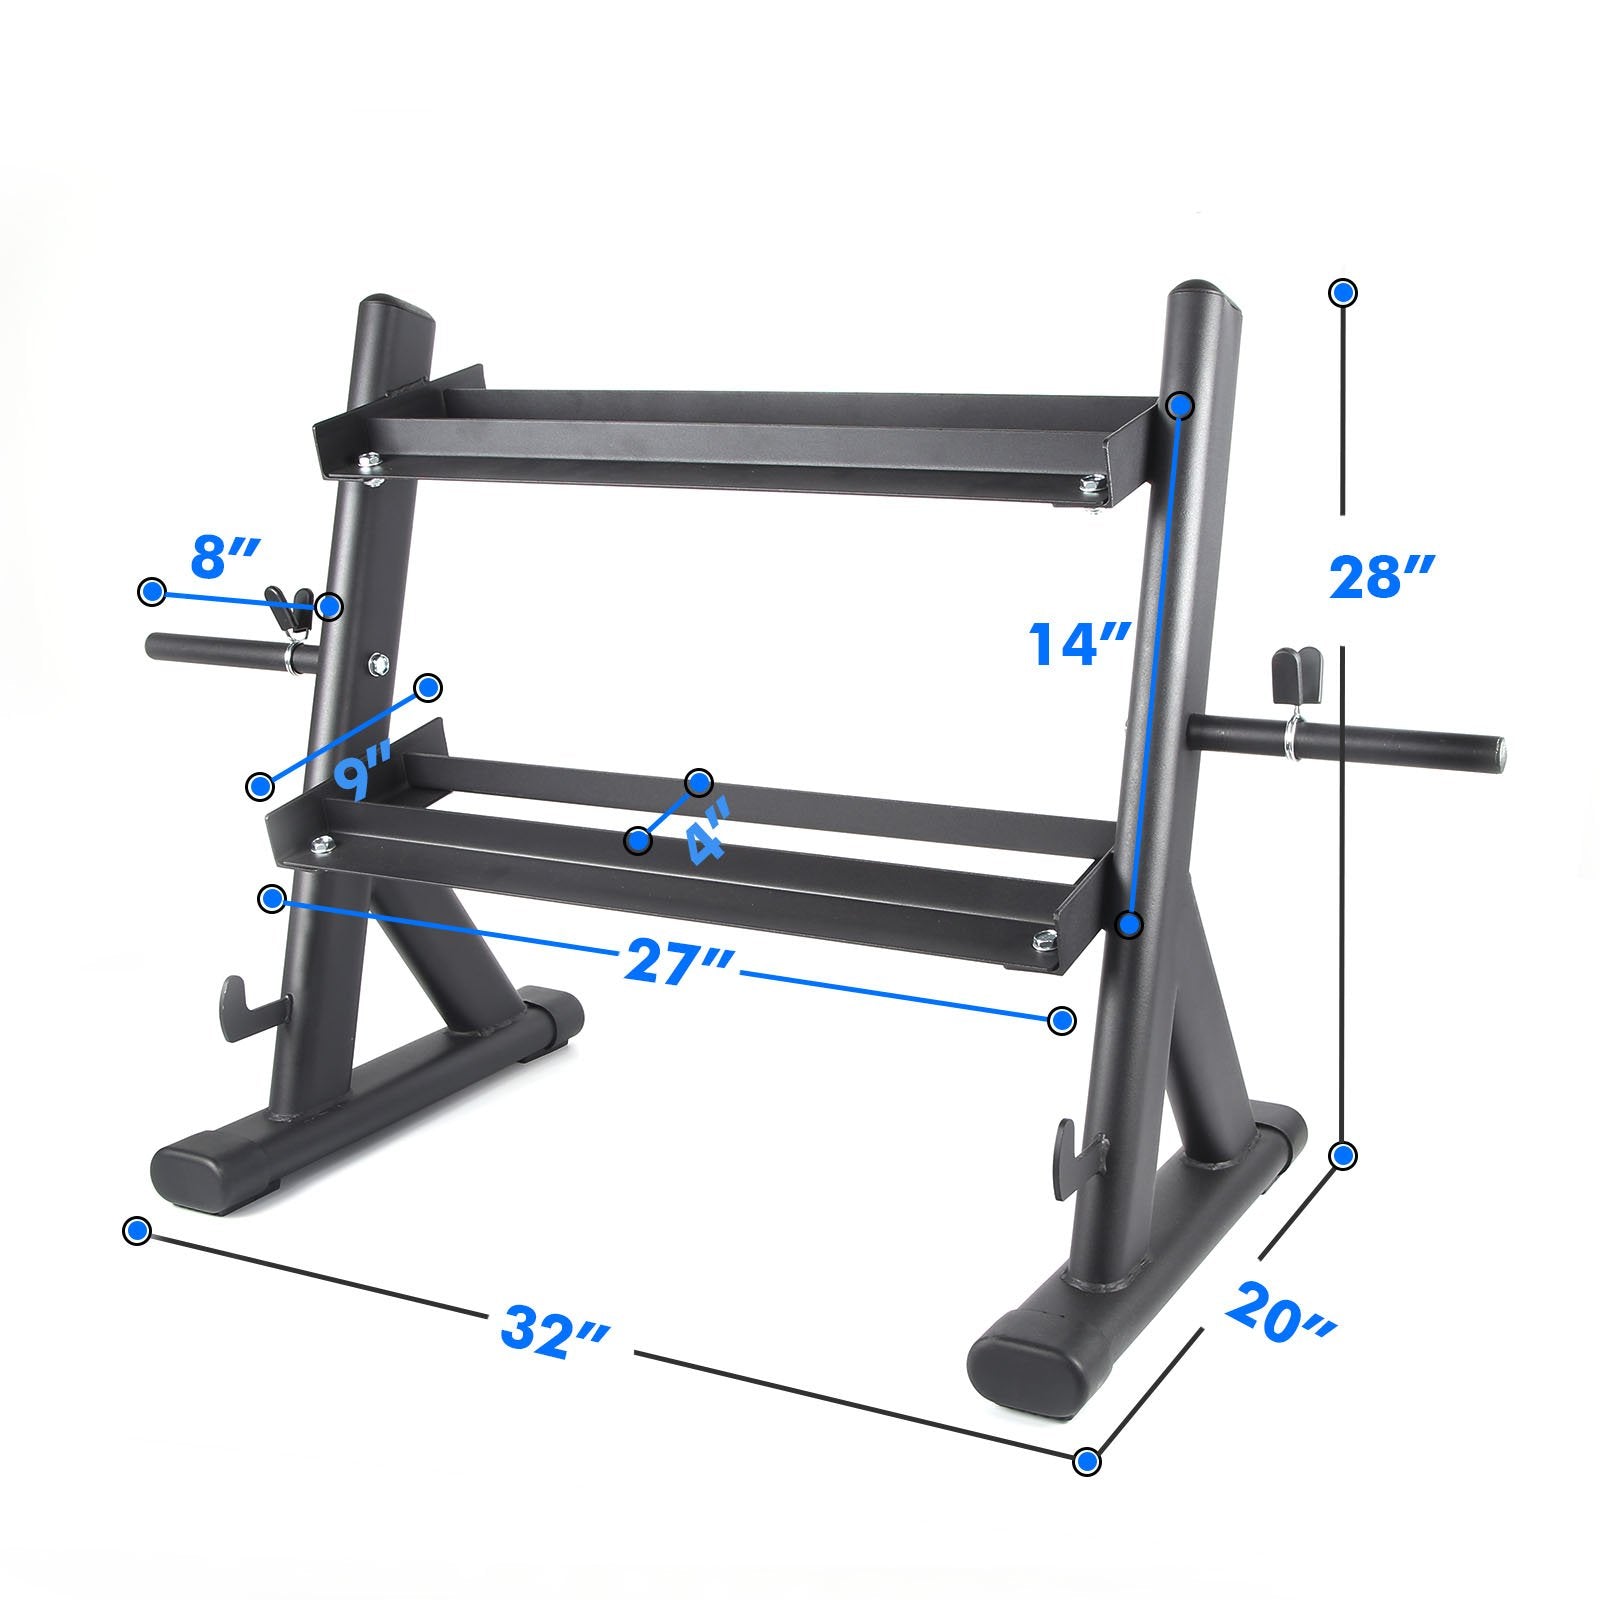 Dumbbell and Barbell Plates Rack Sizes